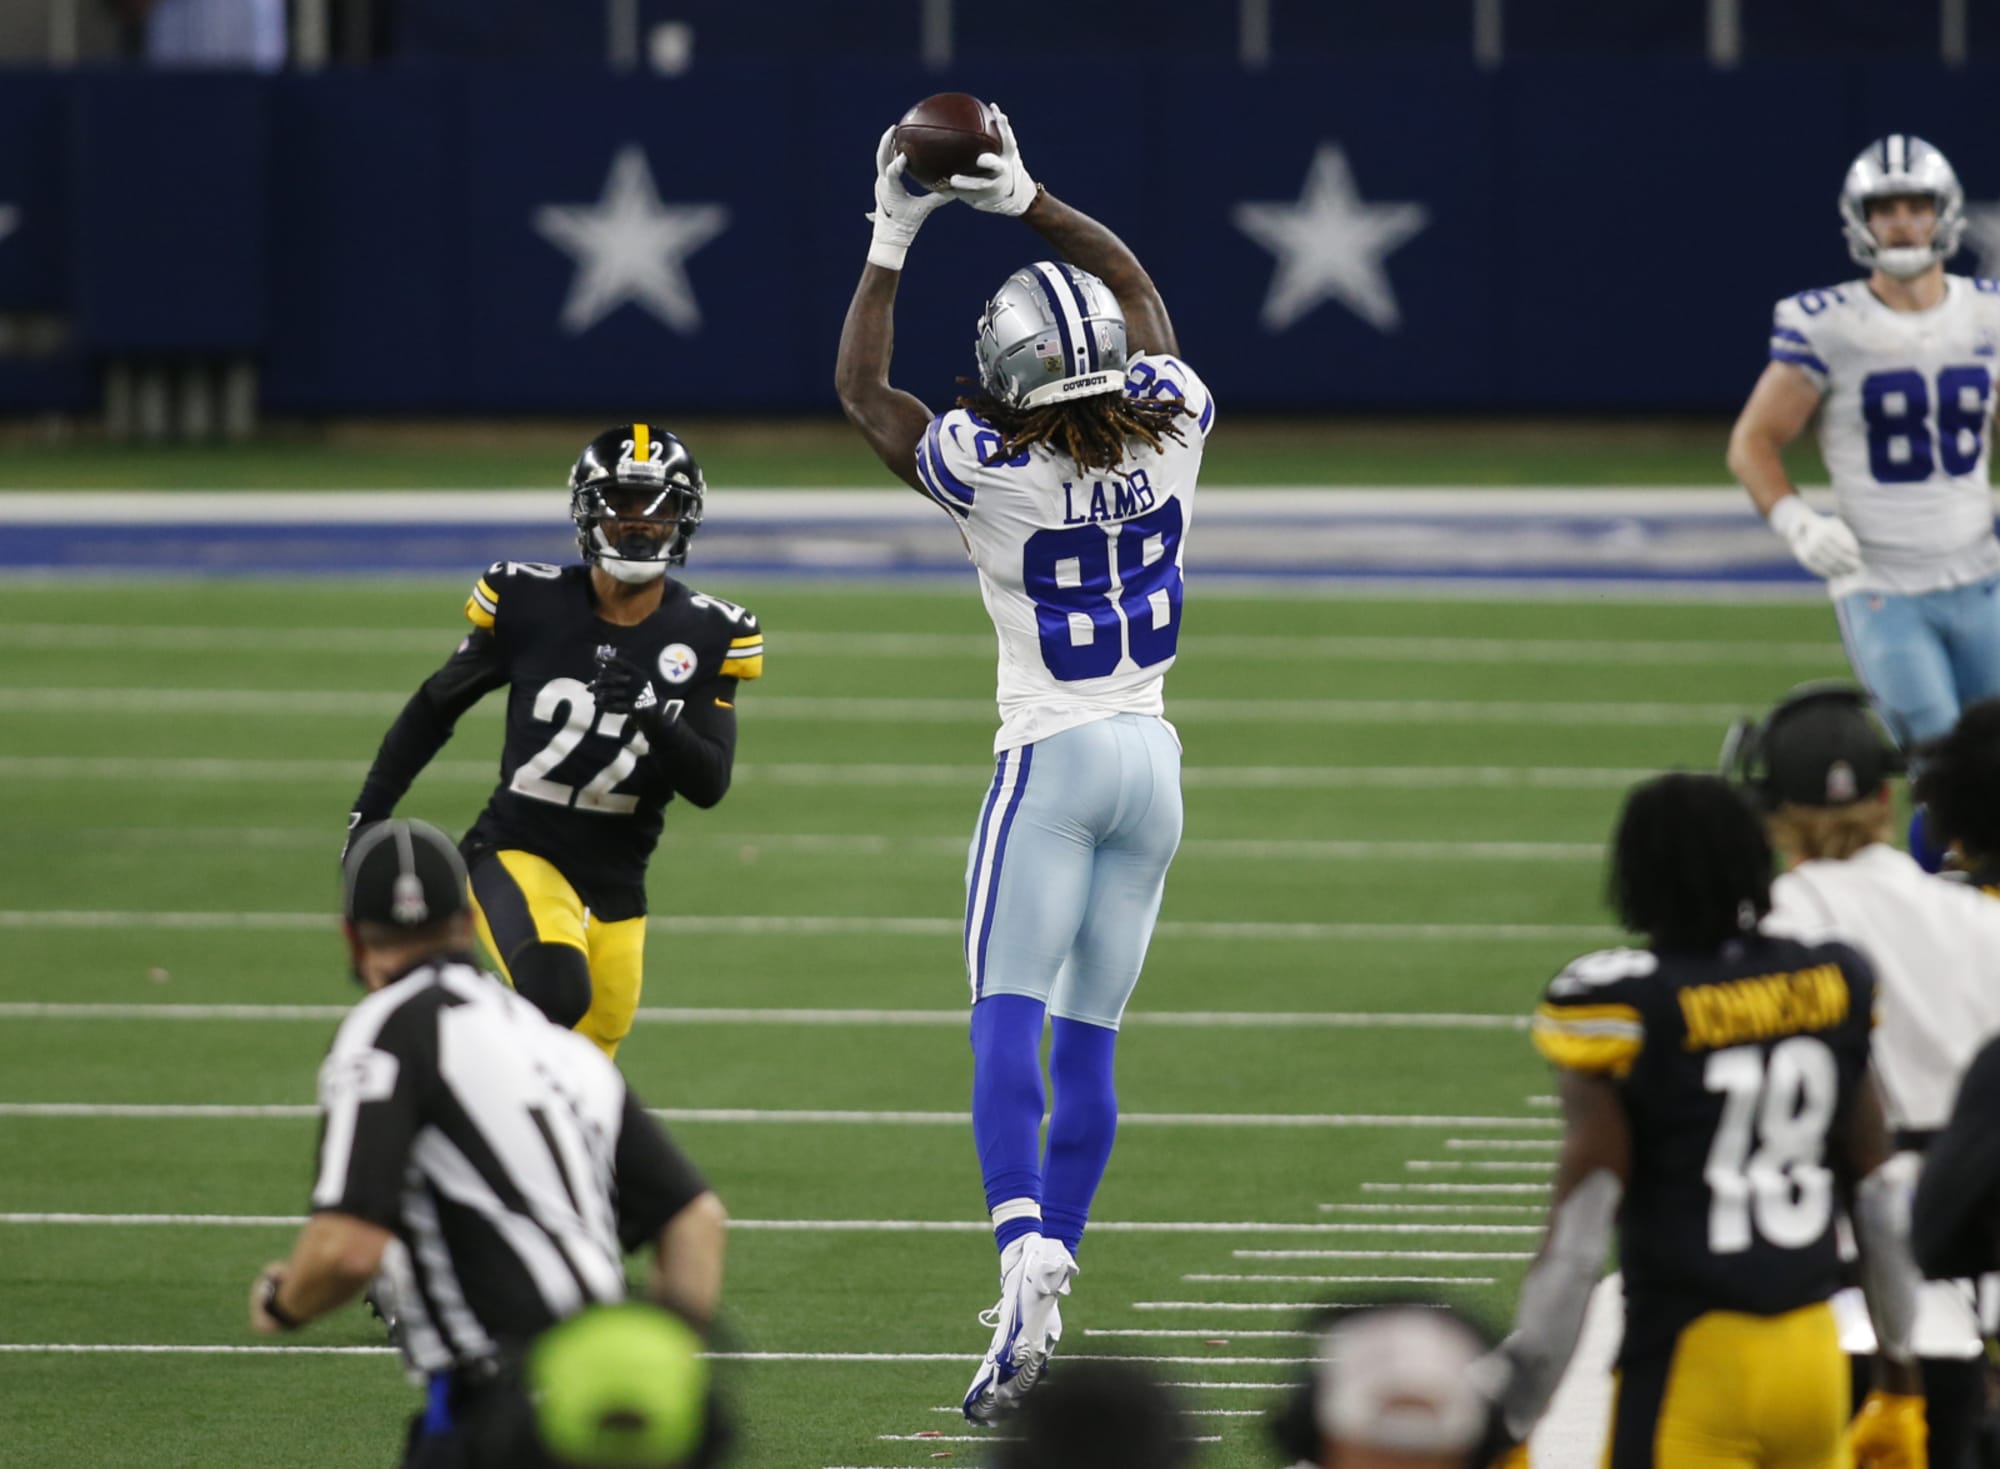 Dallas Cowboys vs. Steelers 3 things to watch for in Hall of Fame game